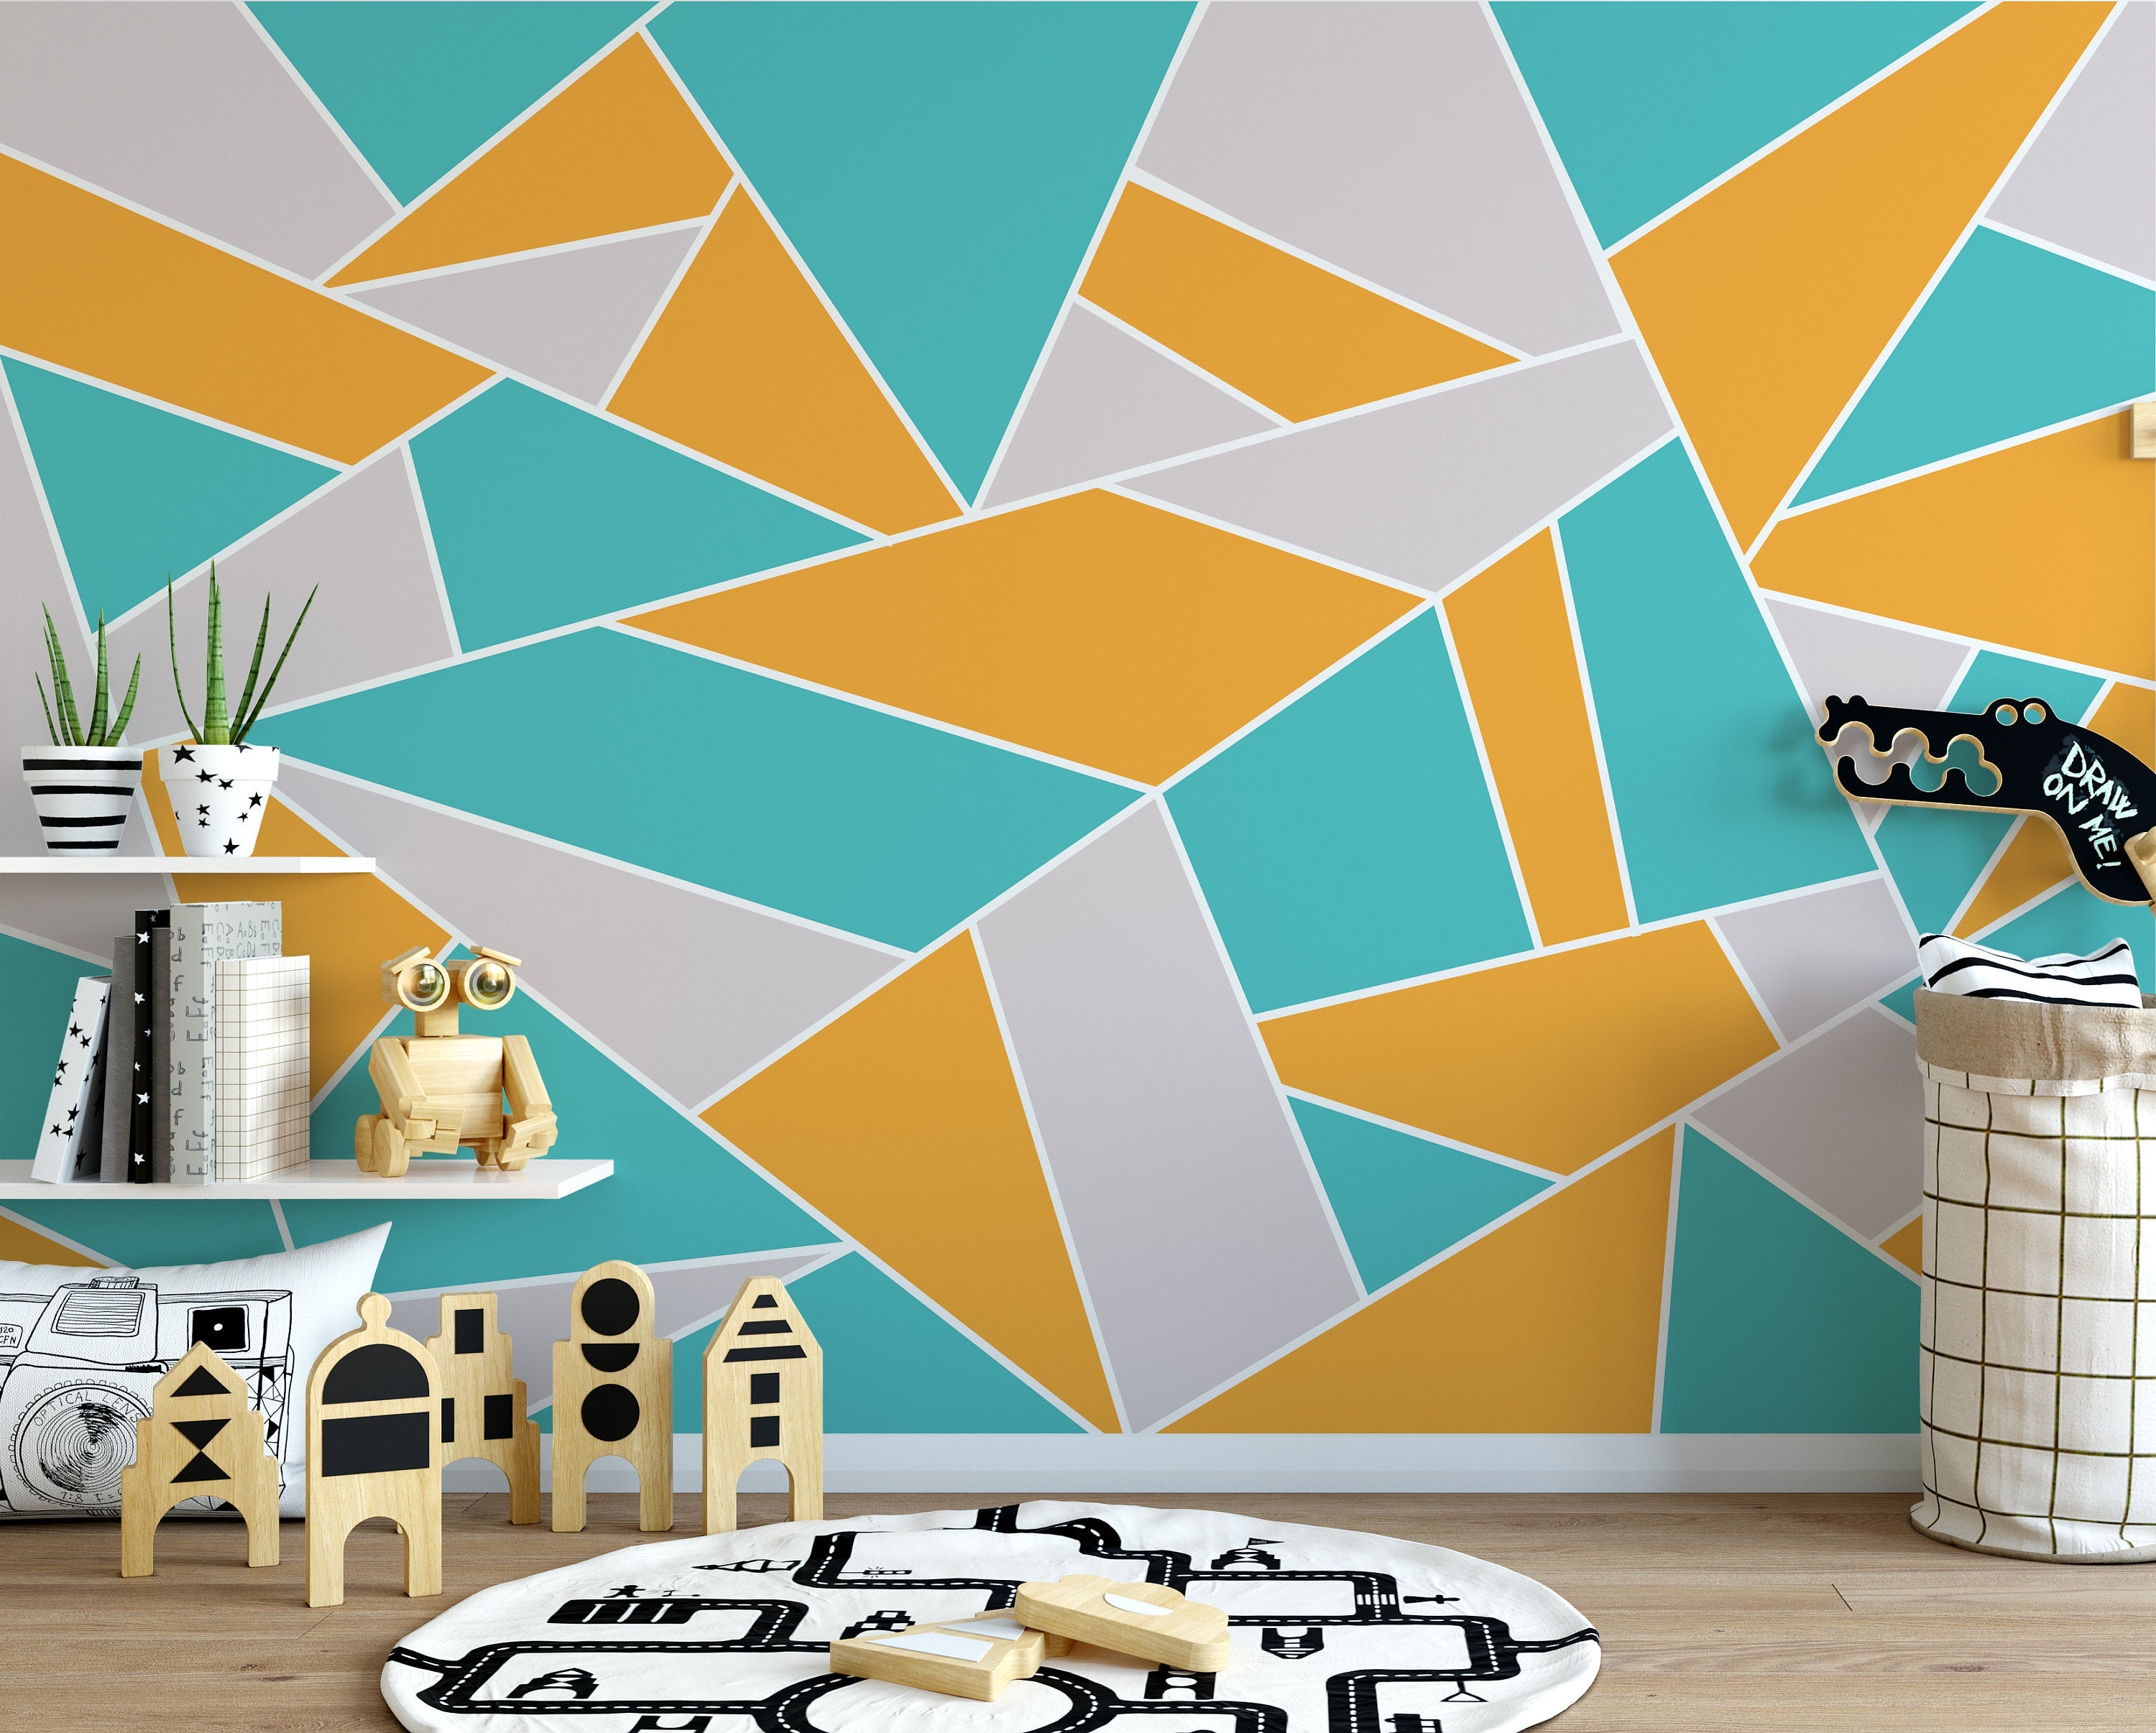 Geometric Colorful Trapezoid Shapes Modern Design Wallpaper Kids Room Children Wall Decor Mural Art Removable